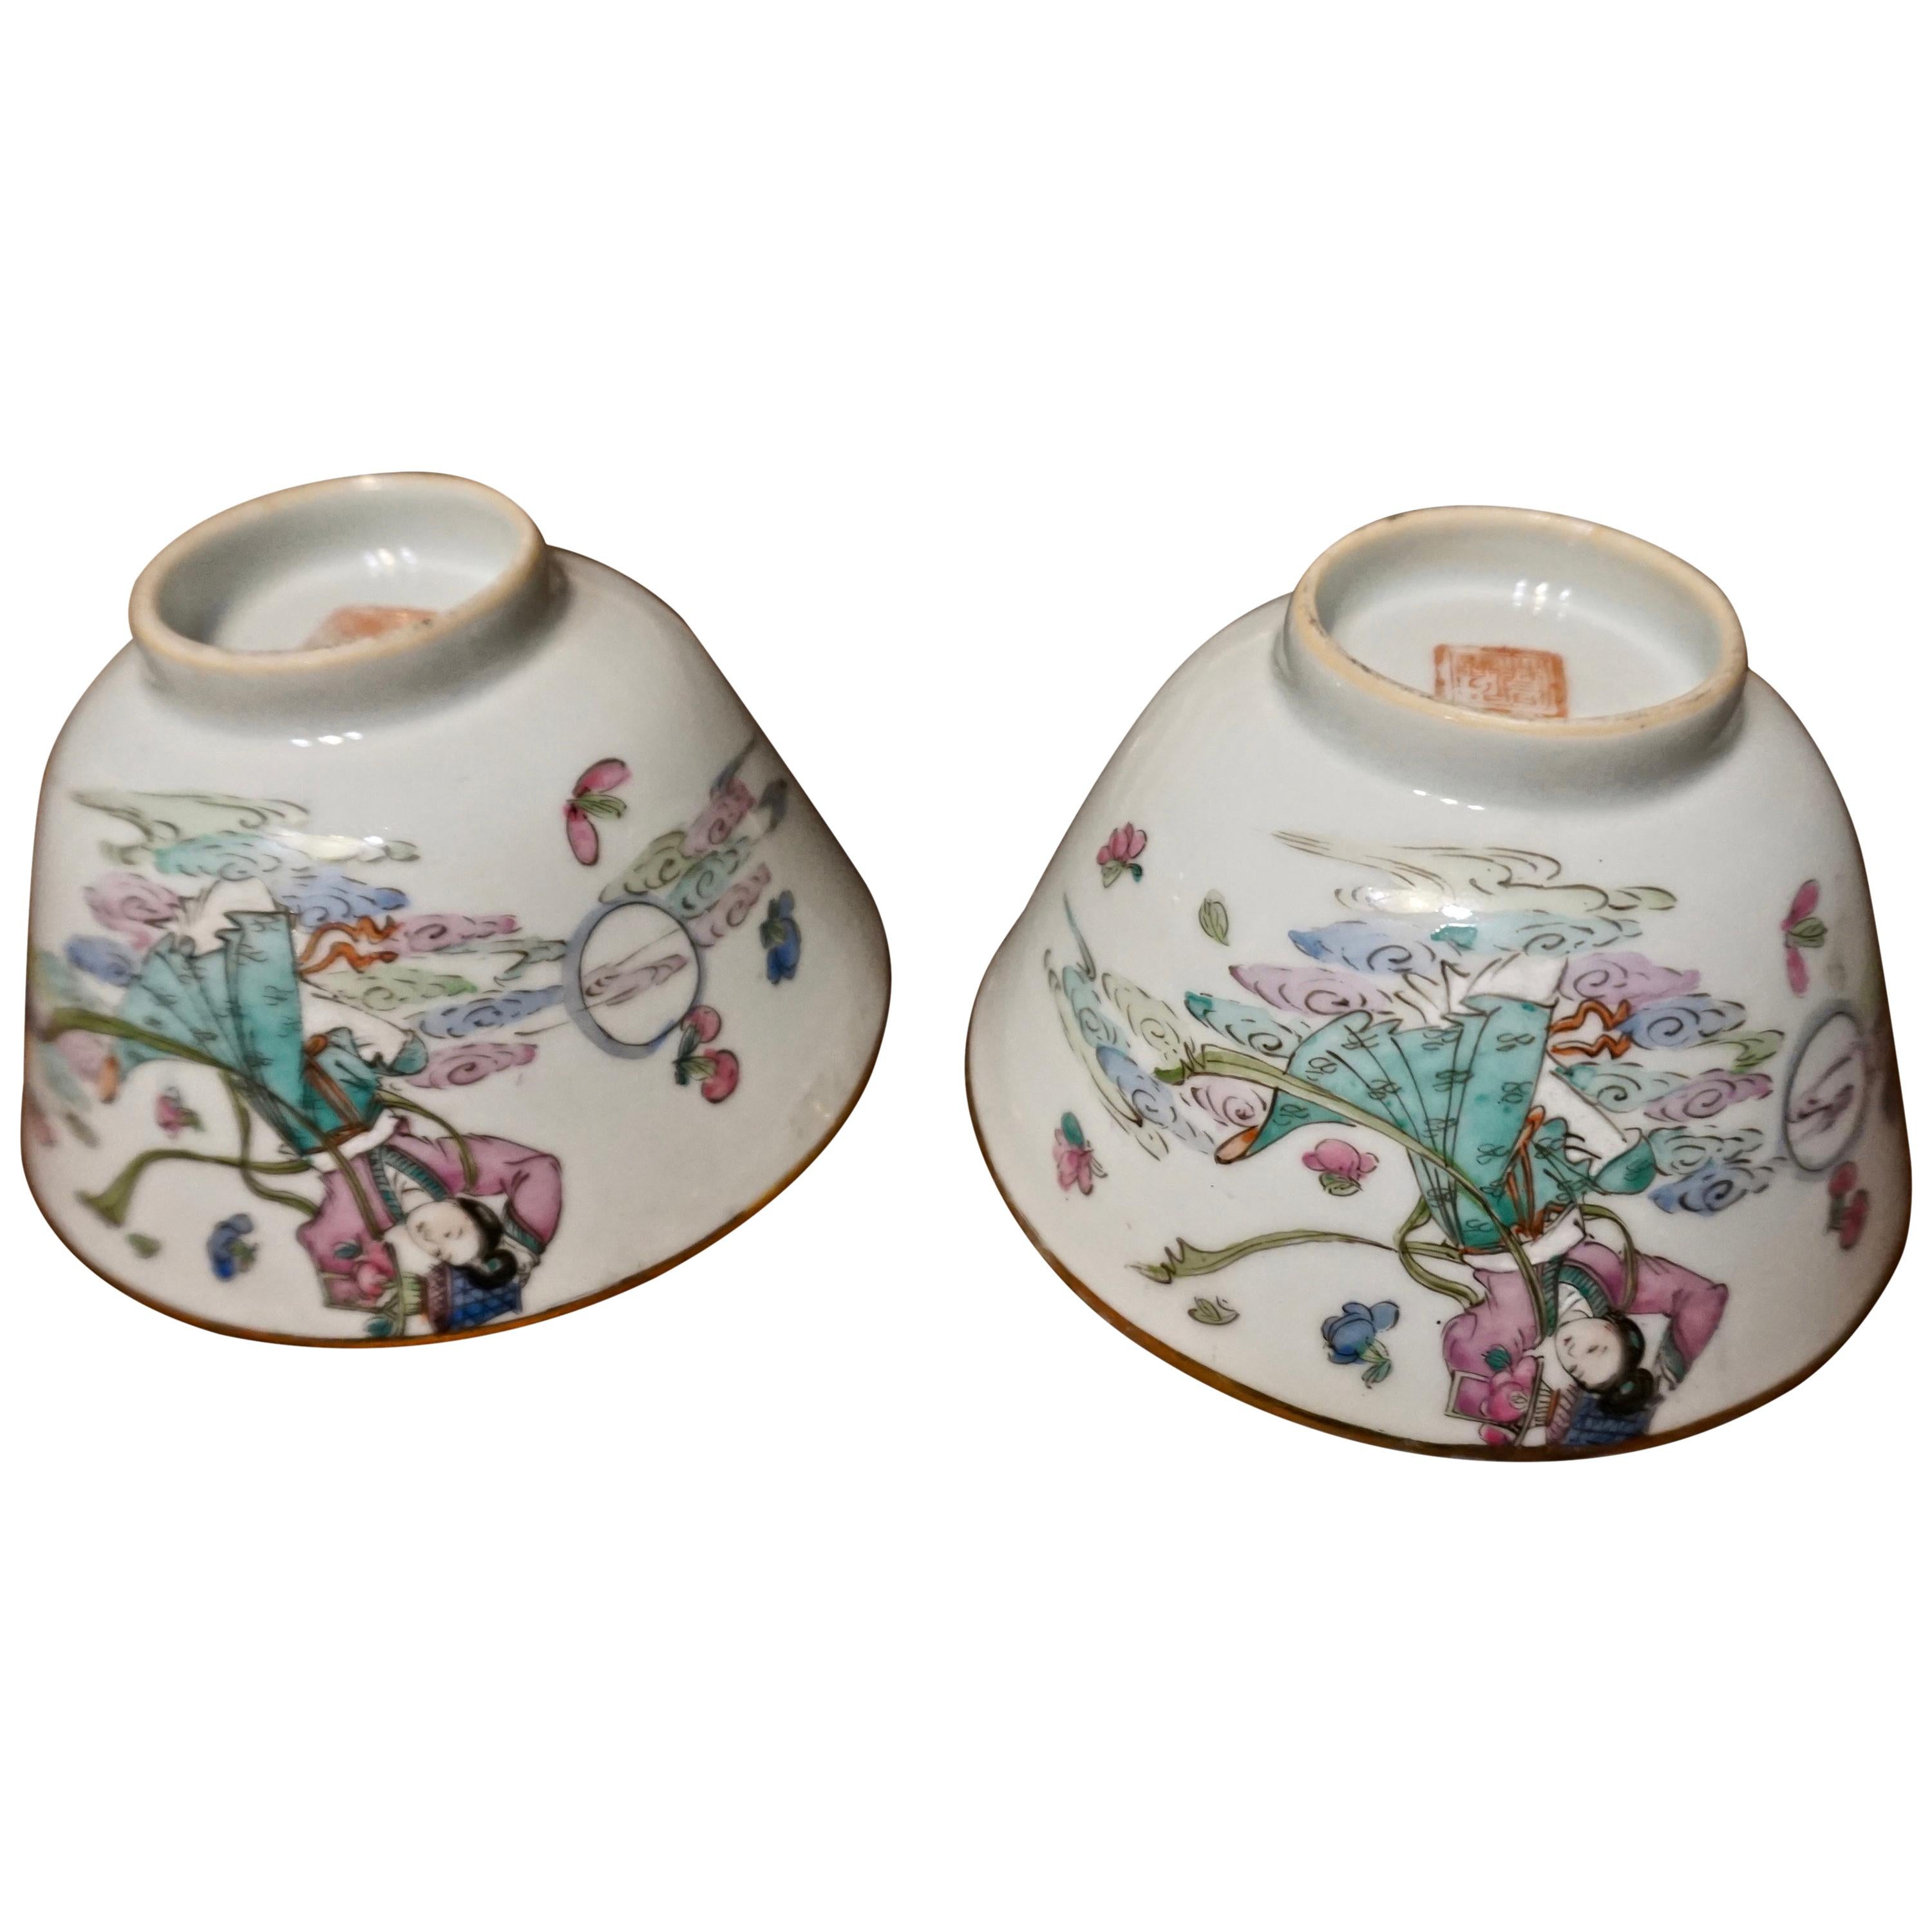 1920s Chinese Export Hand Painted Ceramic Bowls For Sale